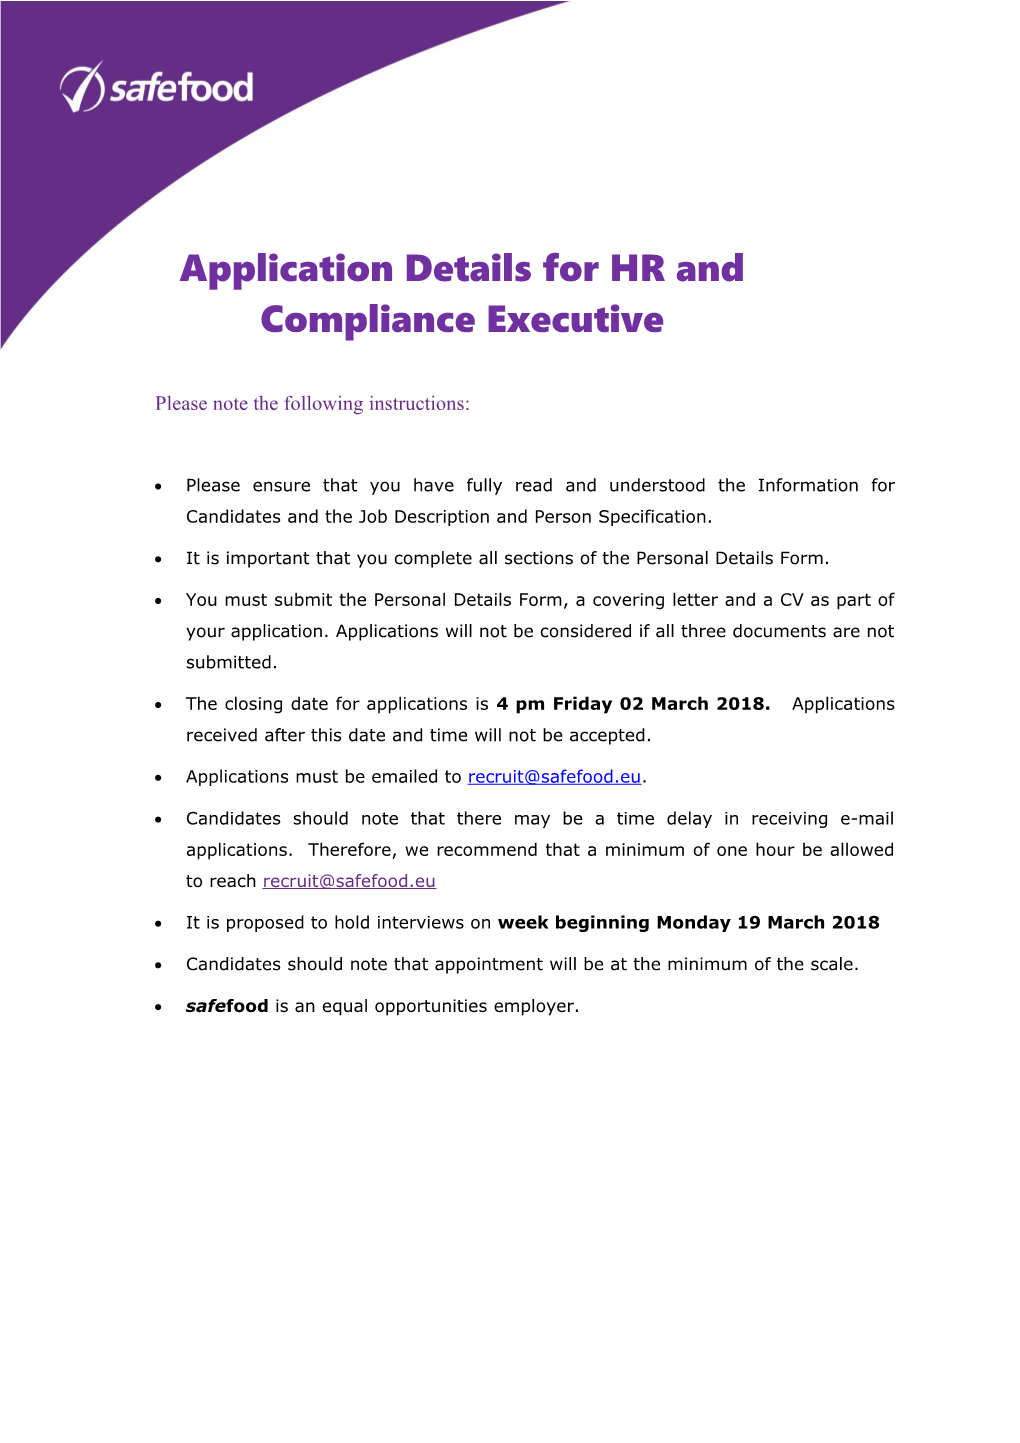 Application Details for HR and Compliance Executive